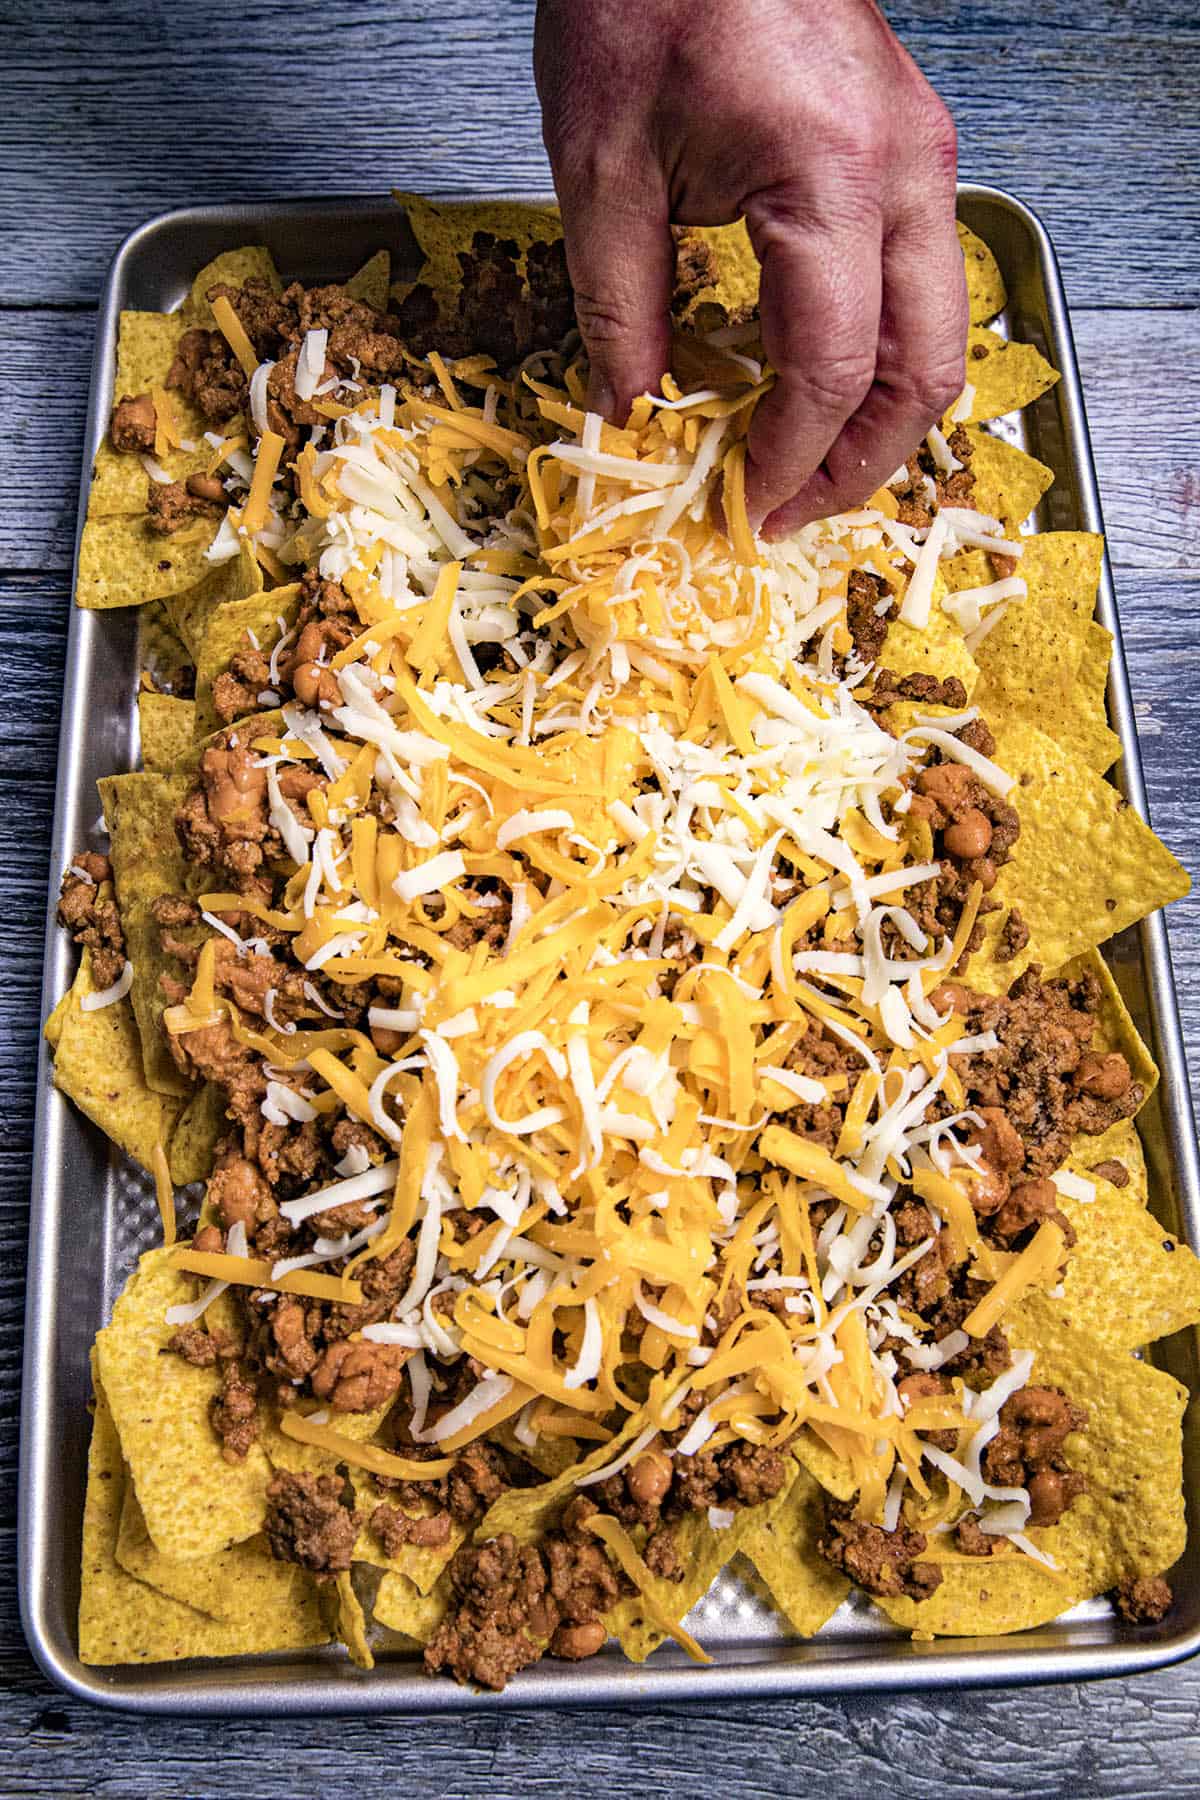 Mike layering shredded cheese onto the nachos base